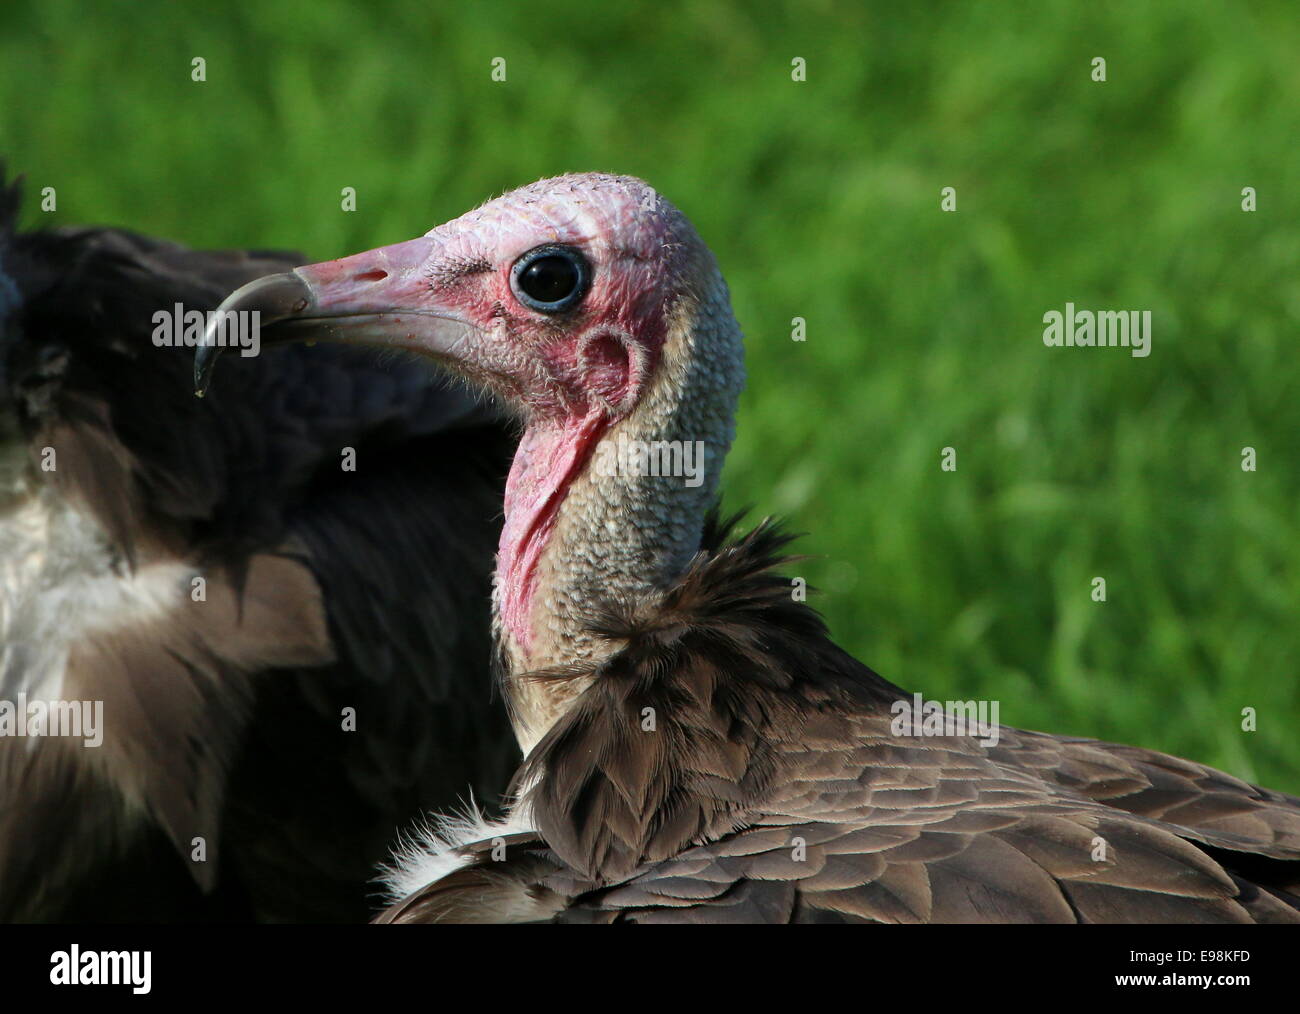 African Hooded vulture (Necrosyrtes monachus), close-up of head Stock Photo